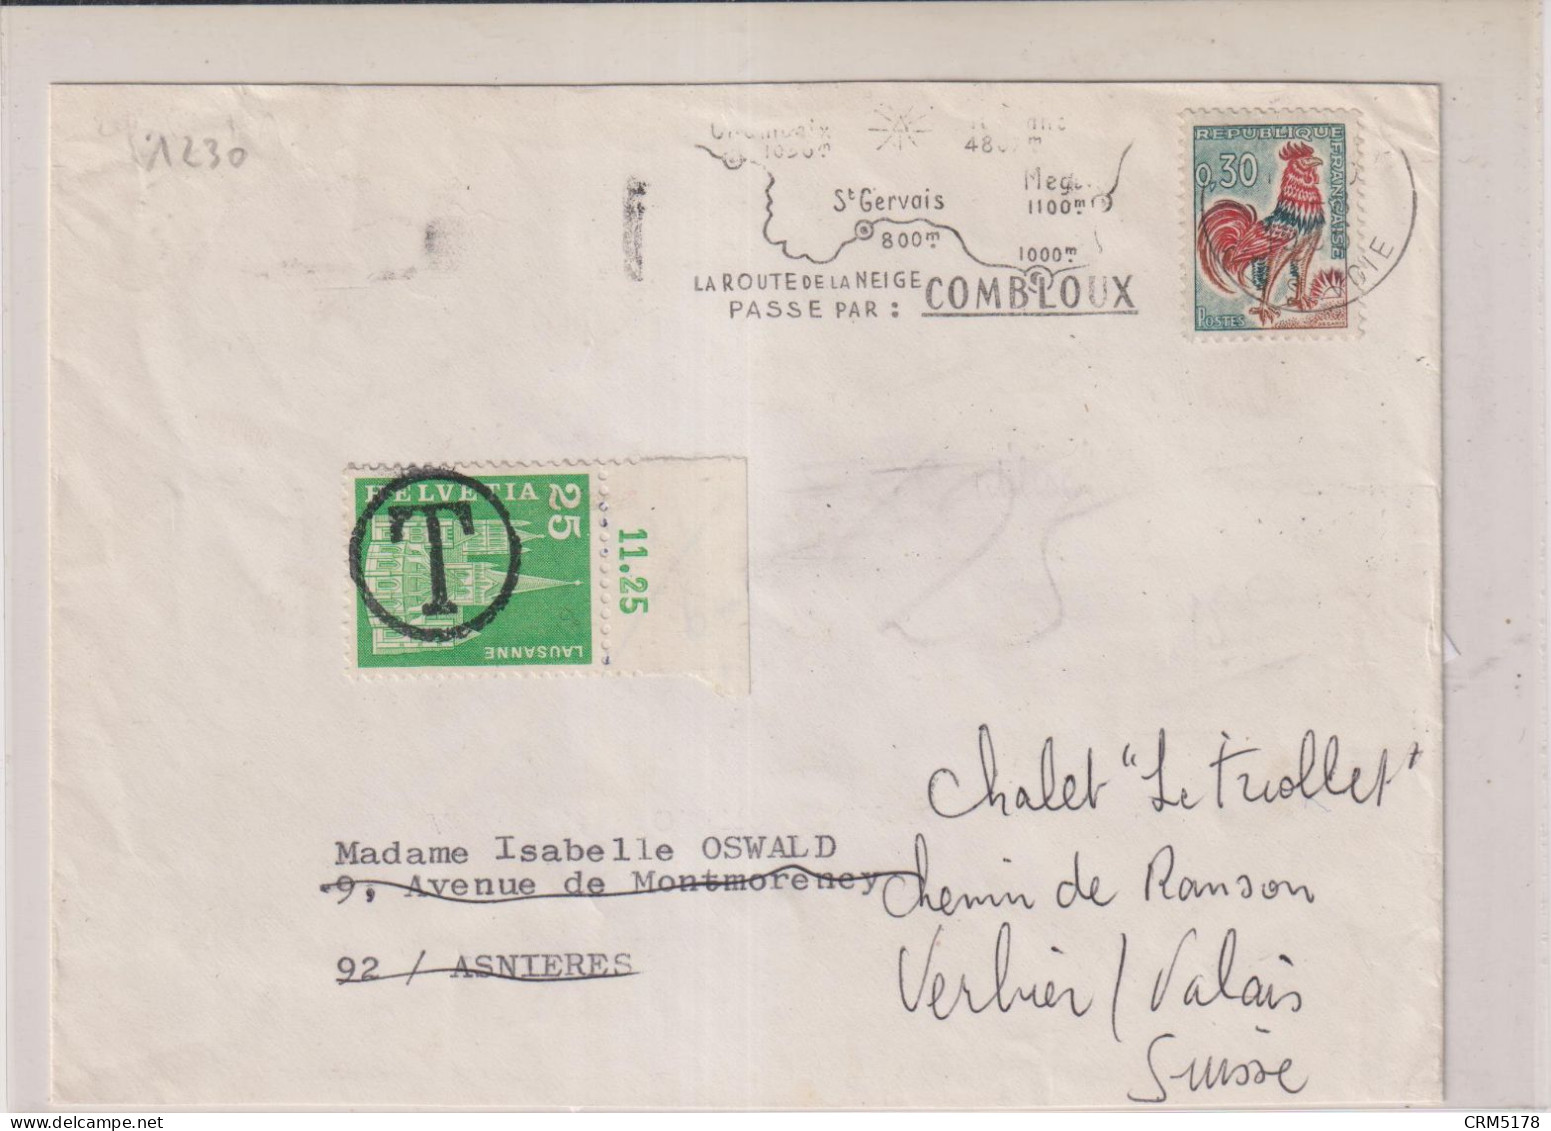 SUISSE-TAXE-1966 - Postage Due